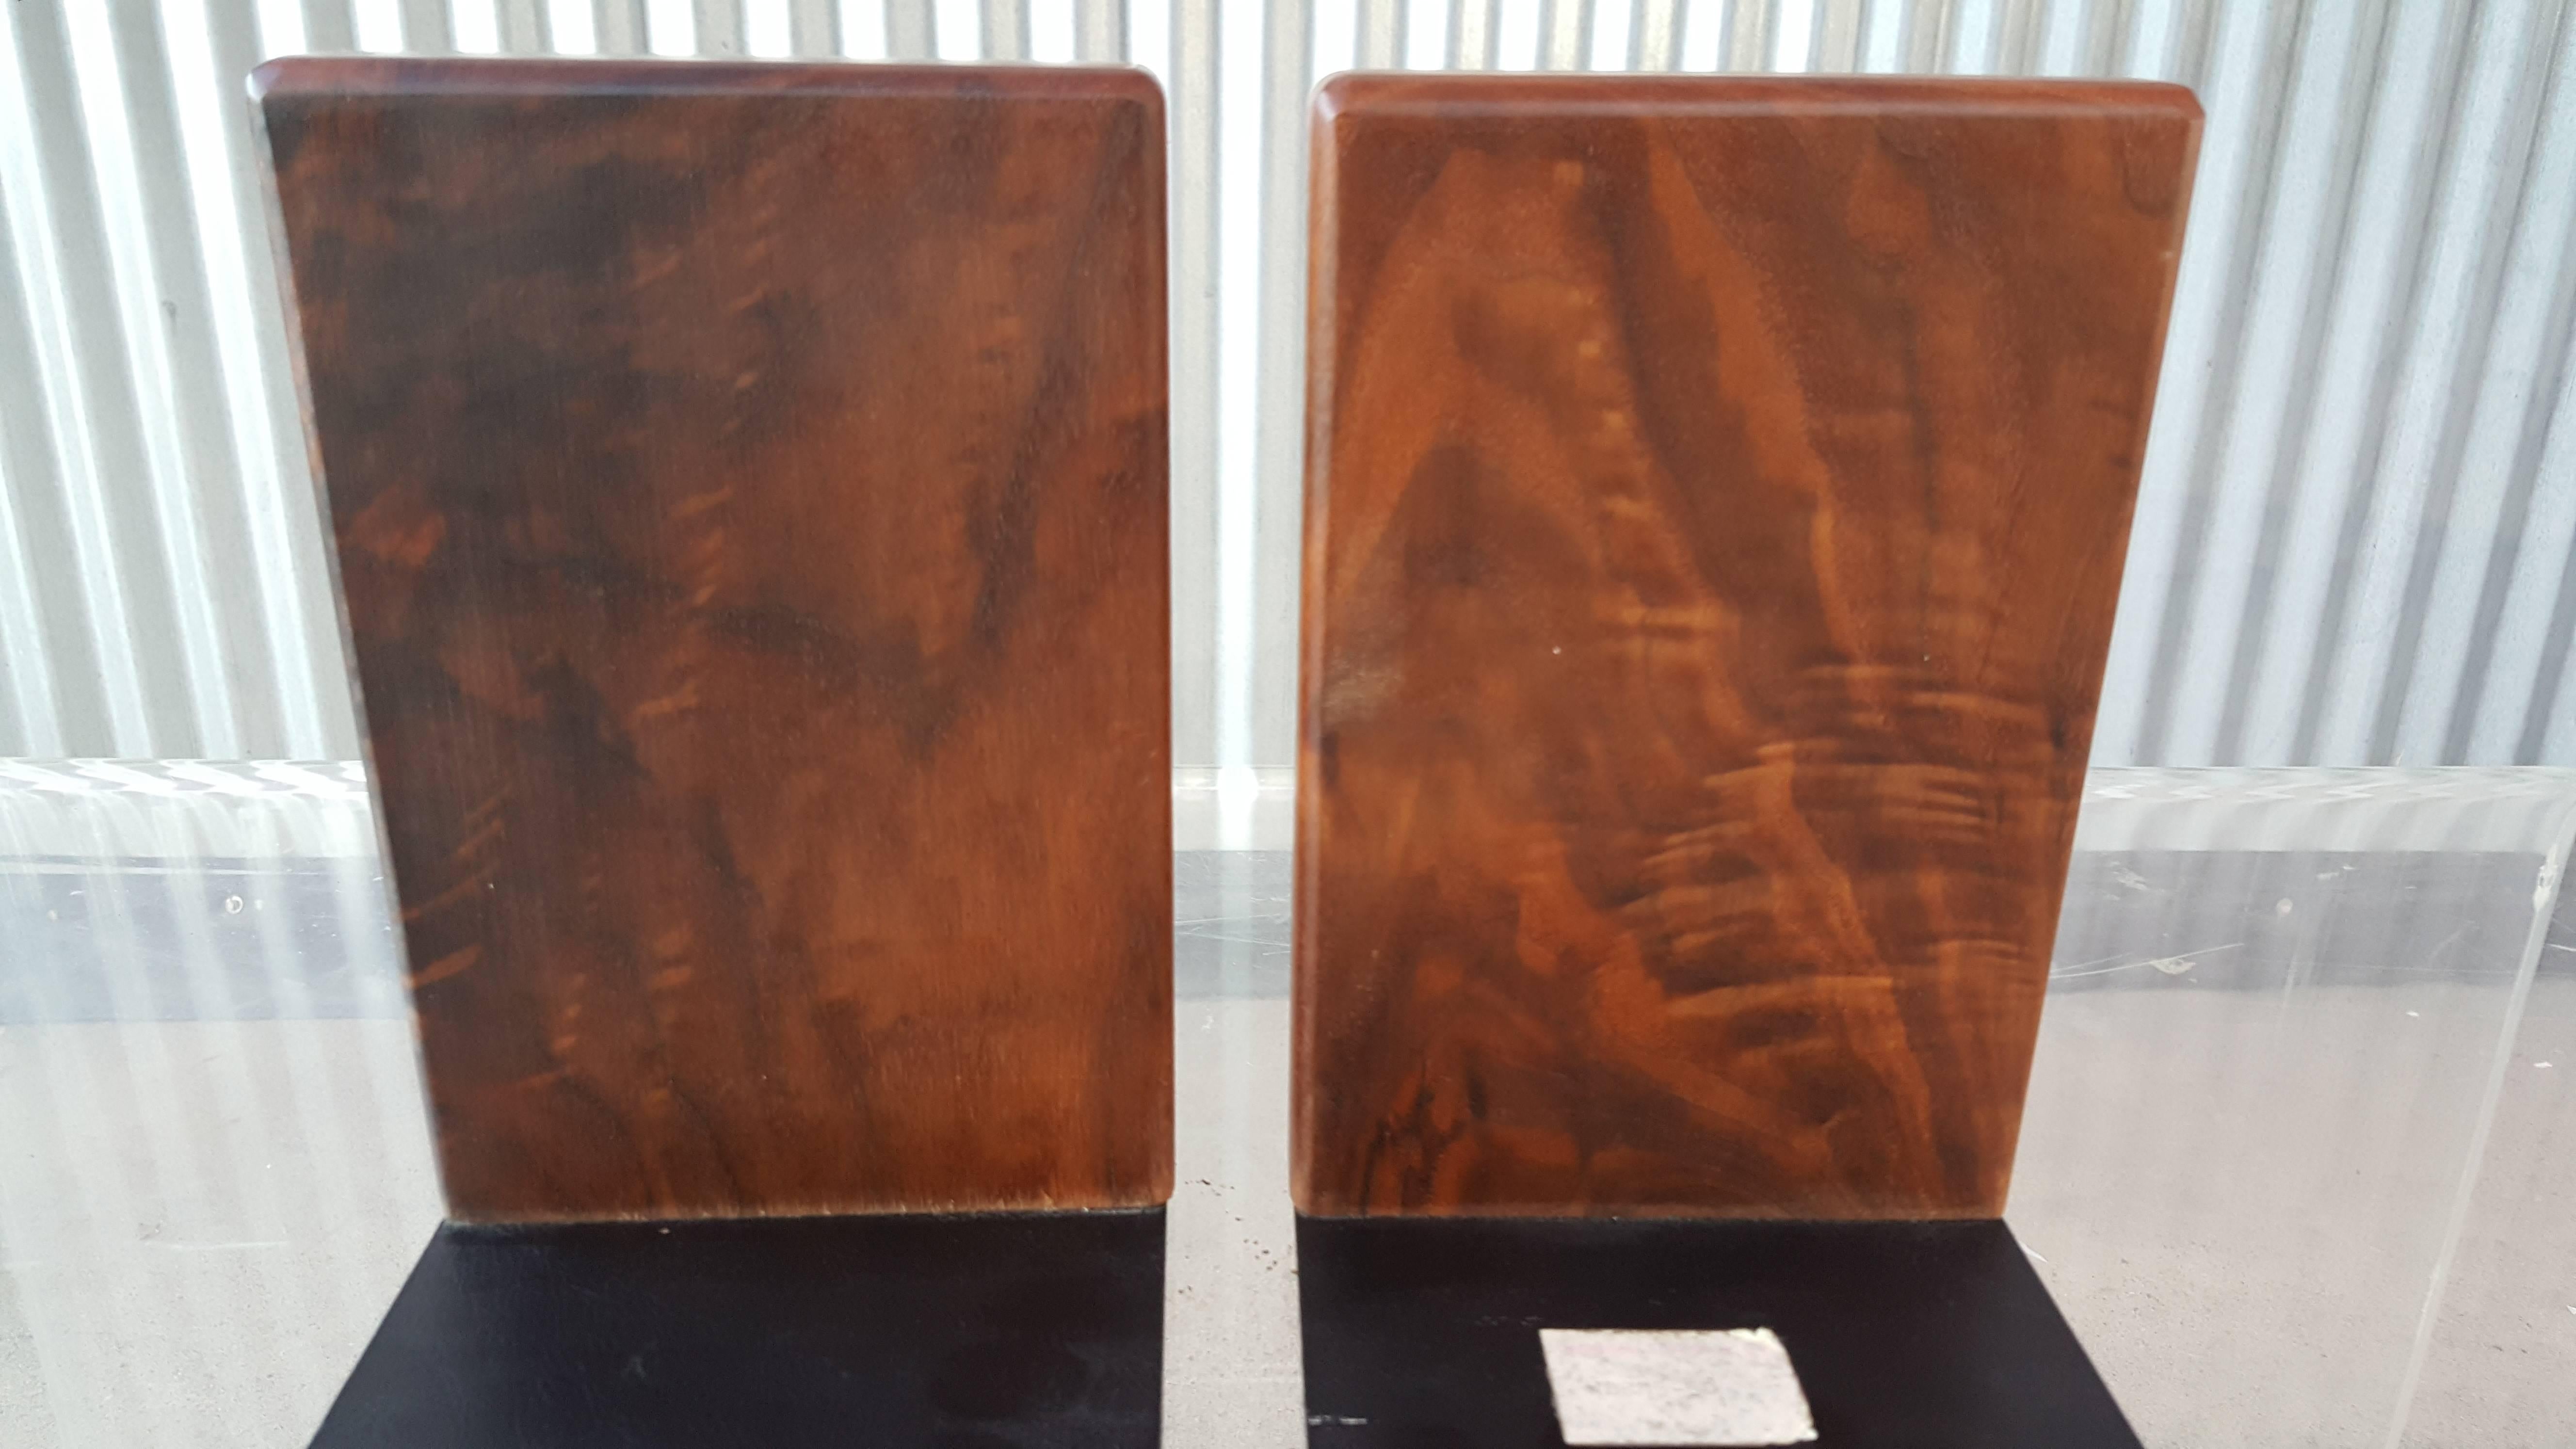 Gordon Martz Walnut and Tile Bookends In Excellent Condition For Sale In Fulton, CA